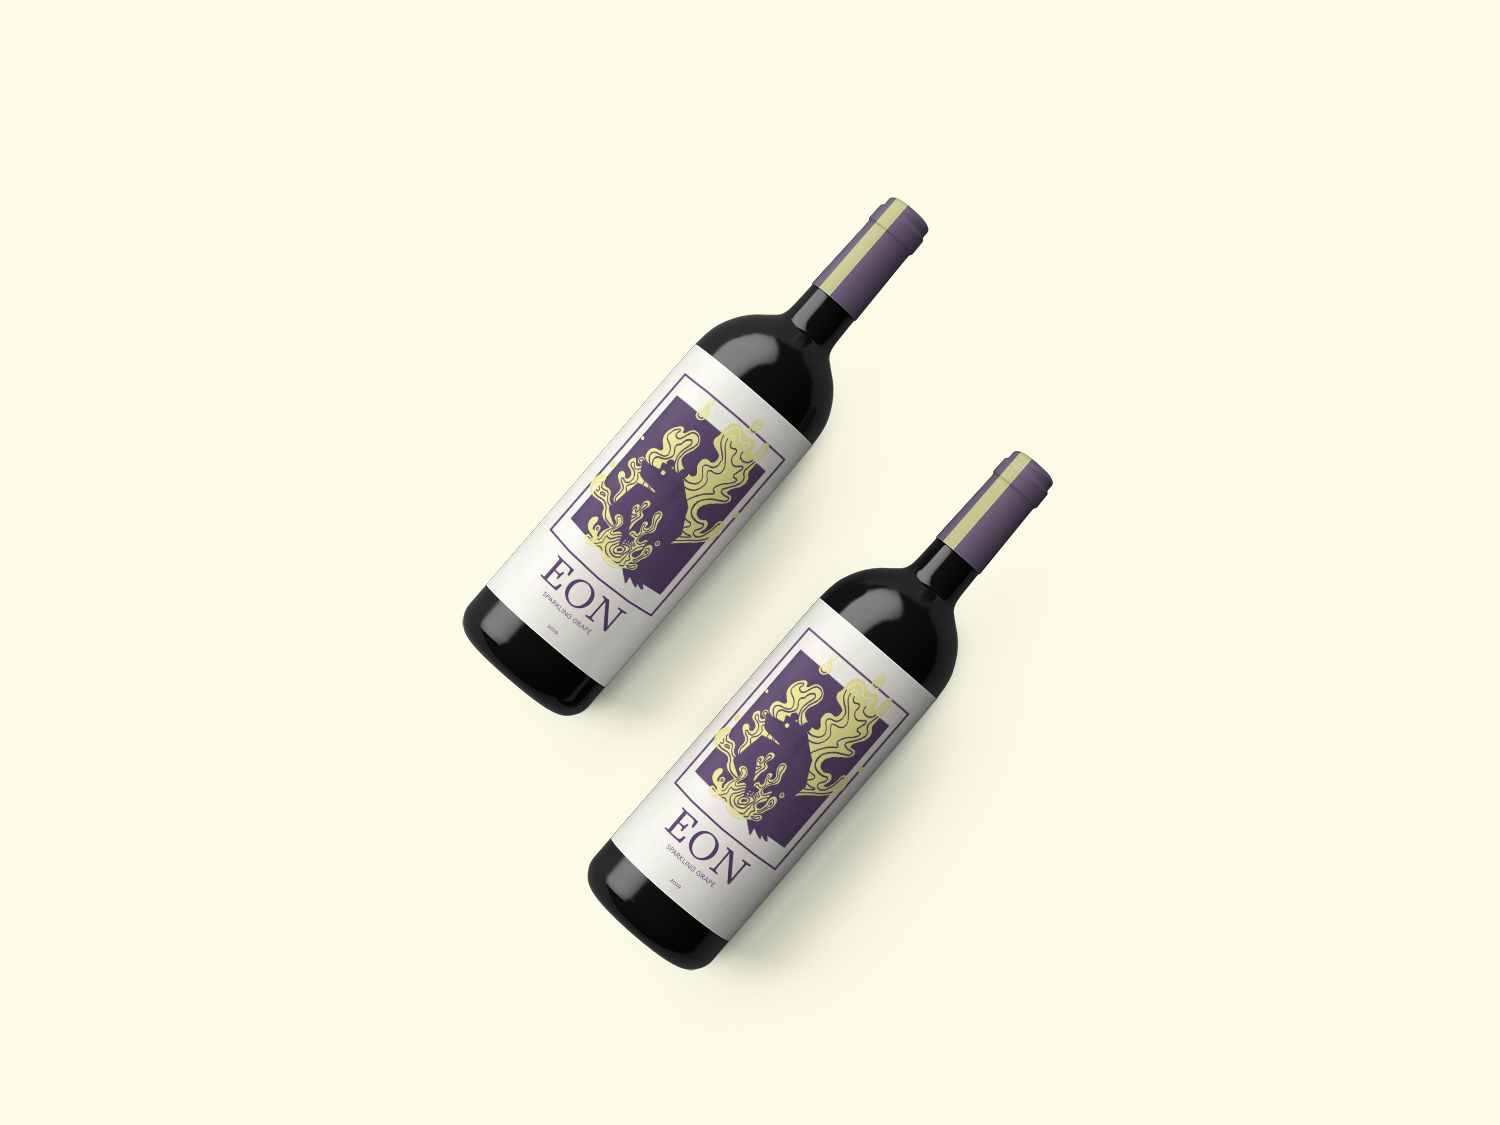 2 wine bottles with a illustration of a bear on the lable